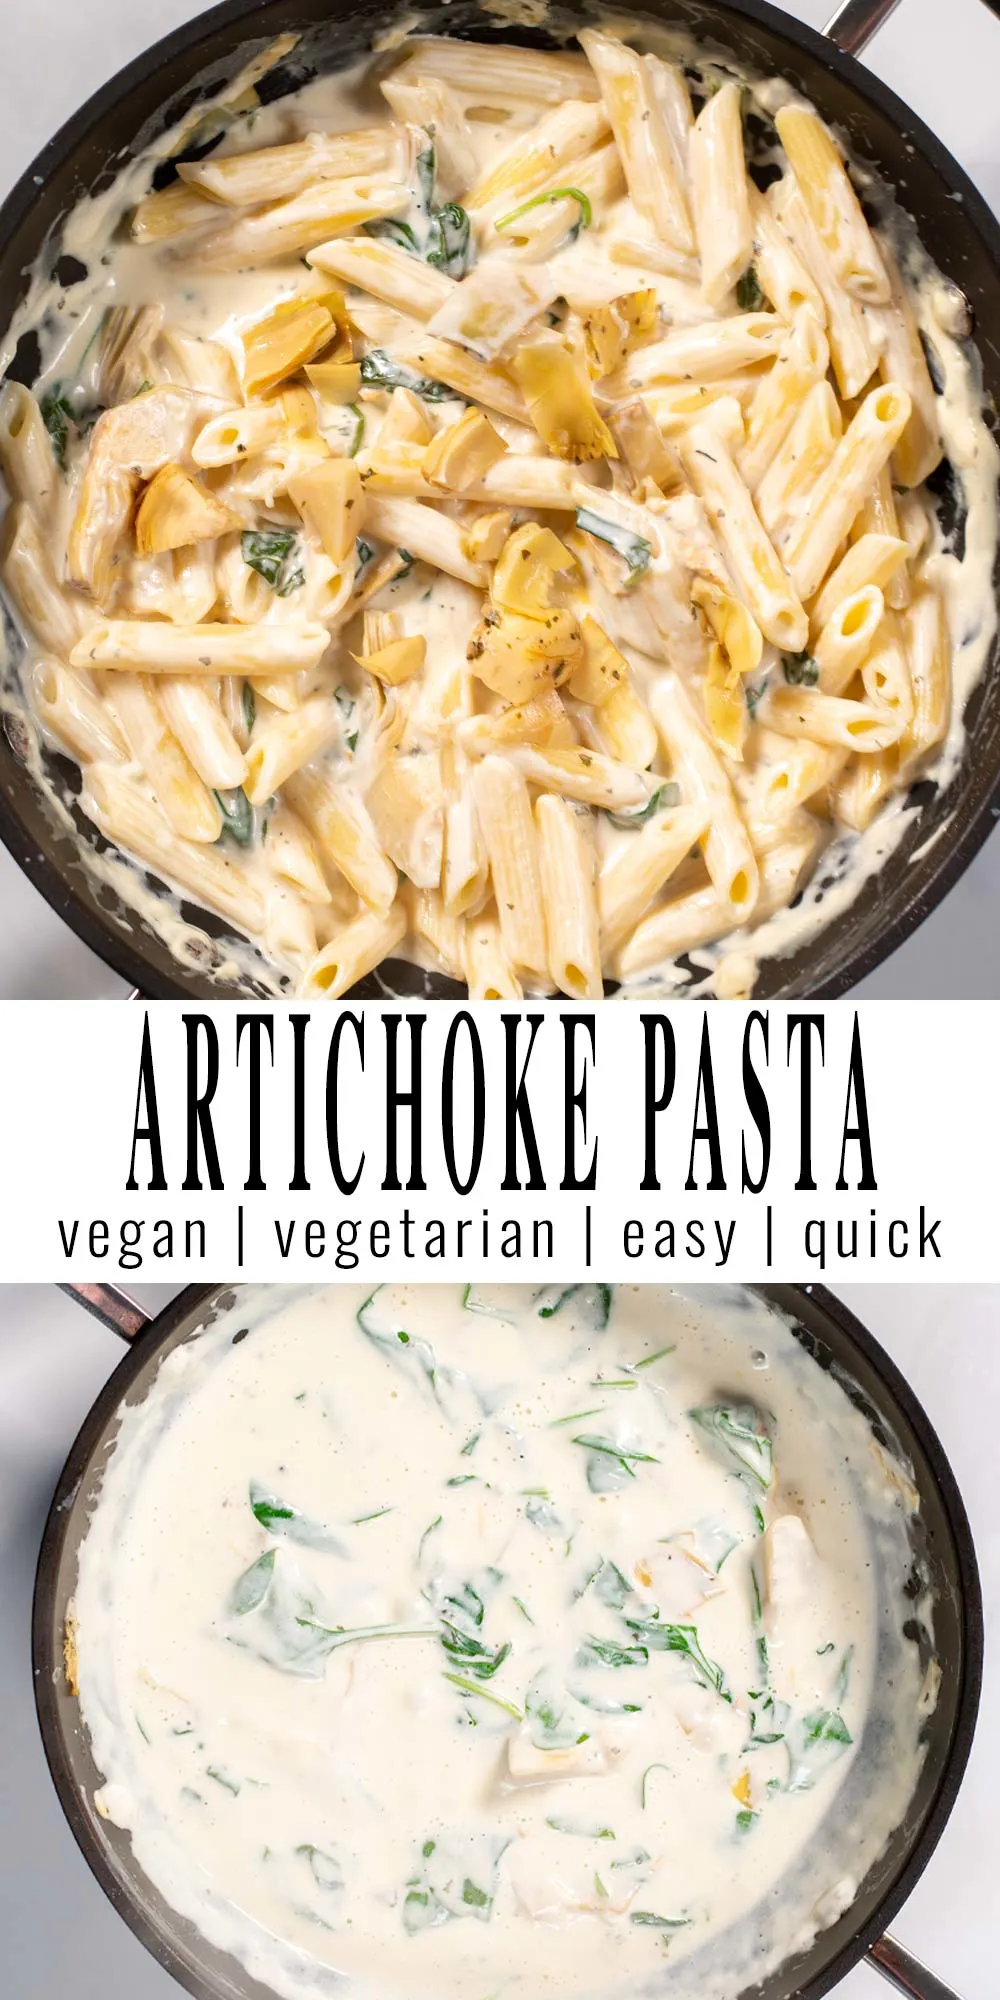 Collage of two pictures of Artichoke Pasta with recipe title text.